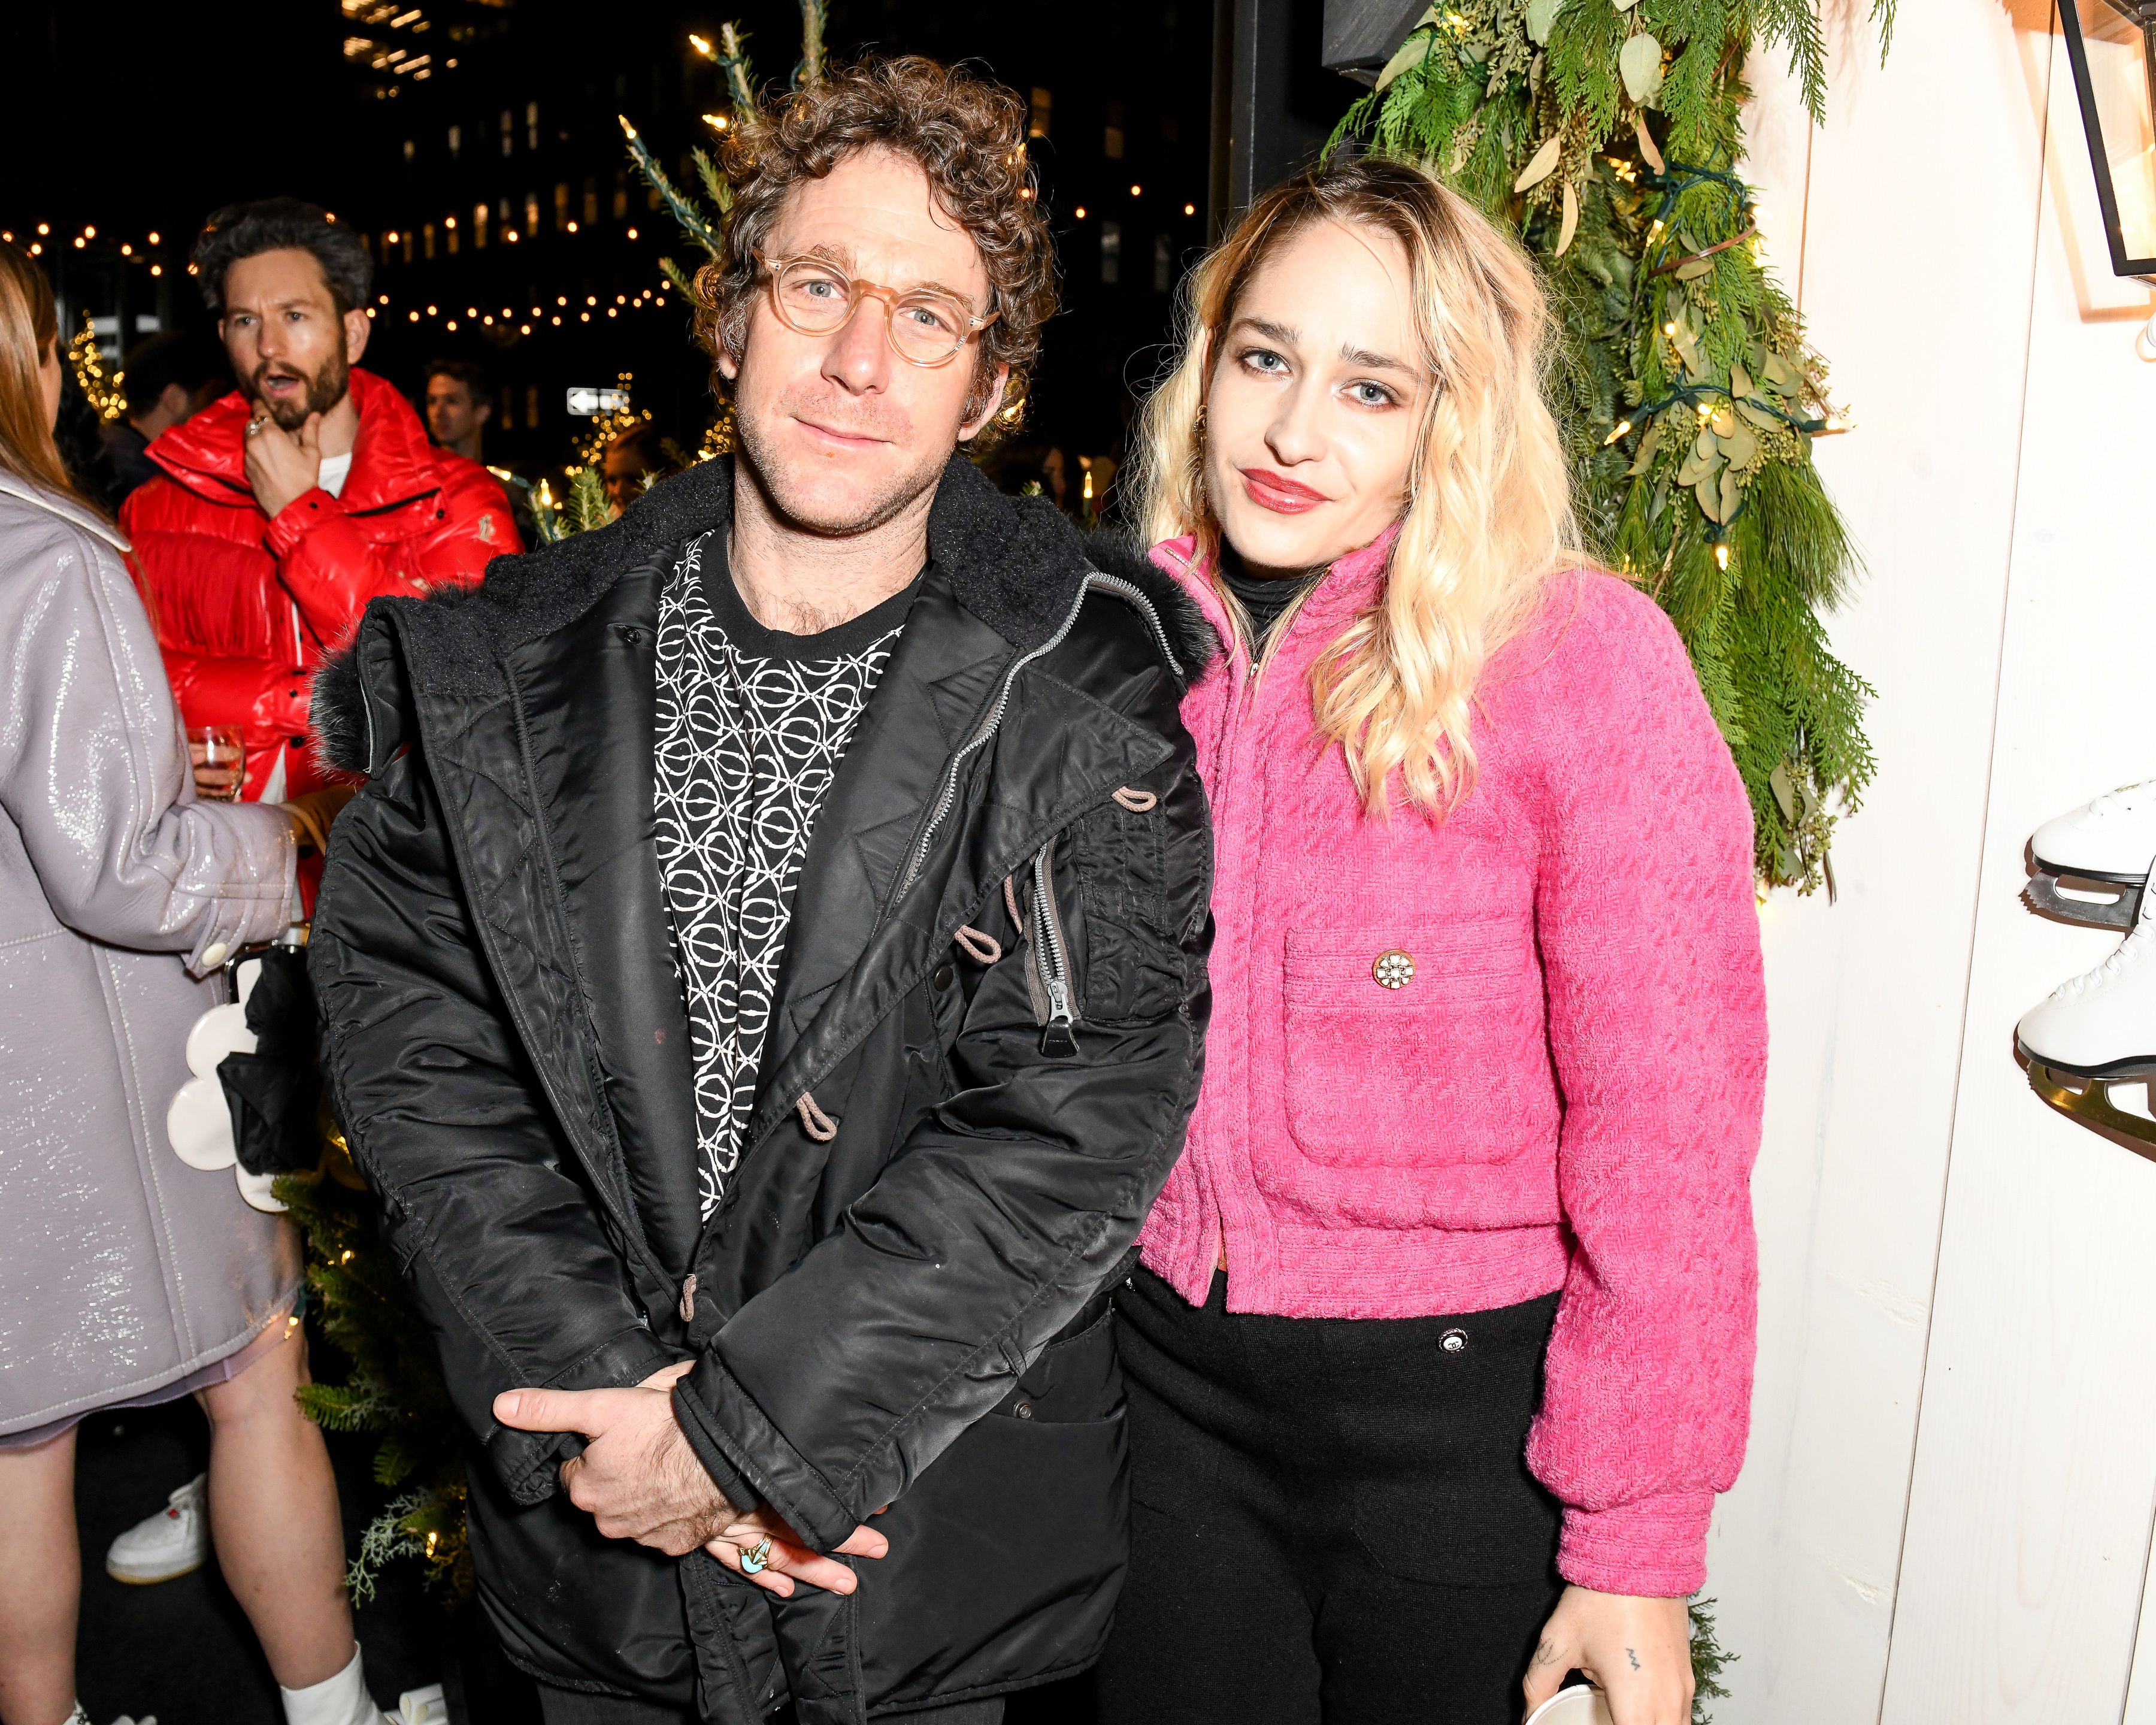 Inside Chanel's Winter Wonderland in NYC - Celebrity Fashion Party